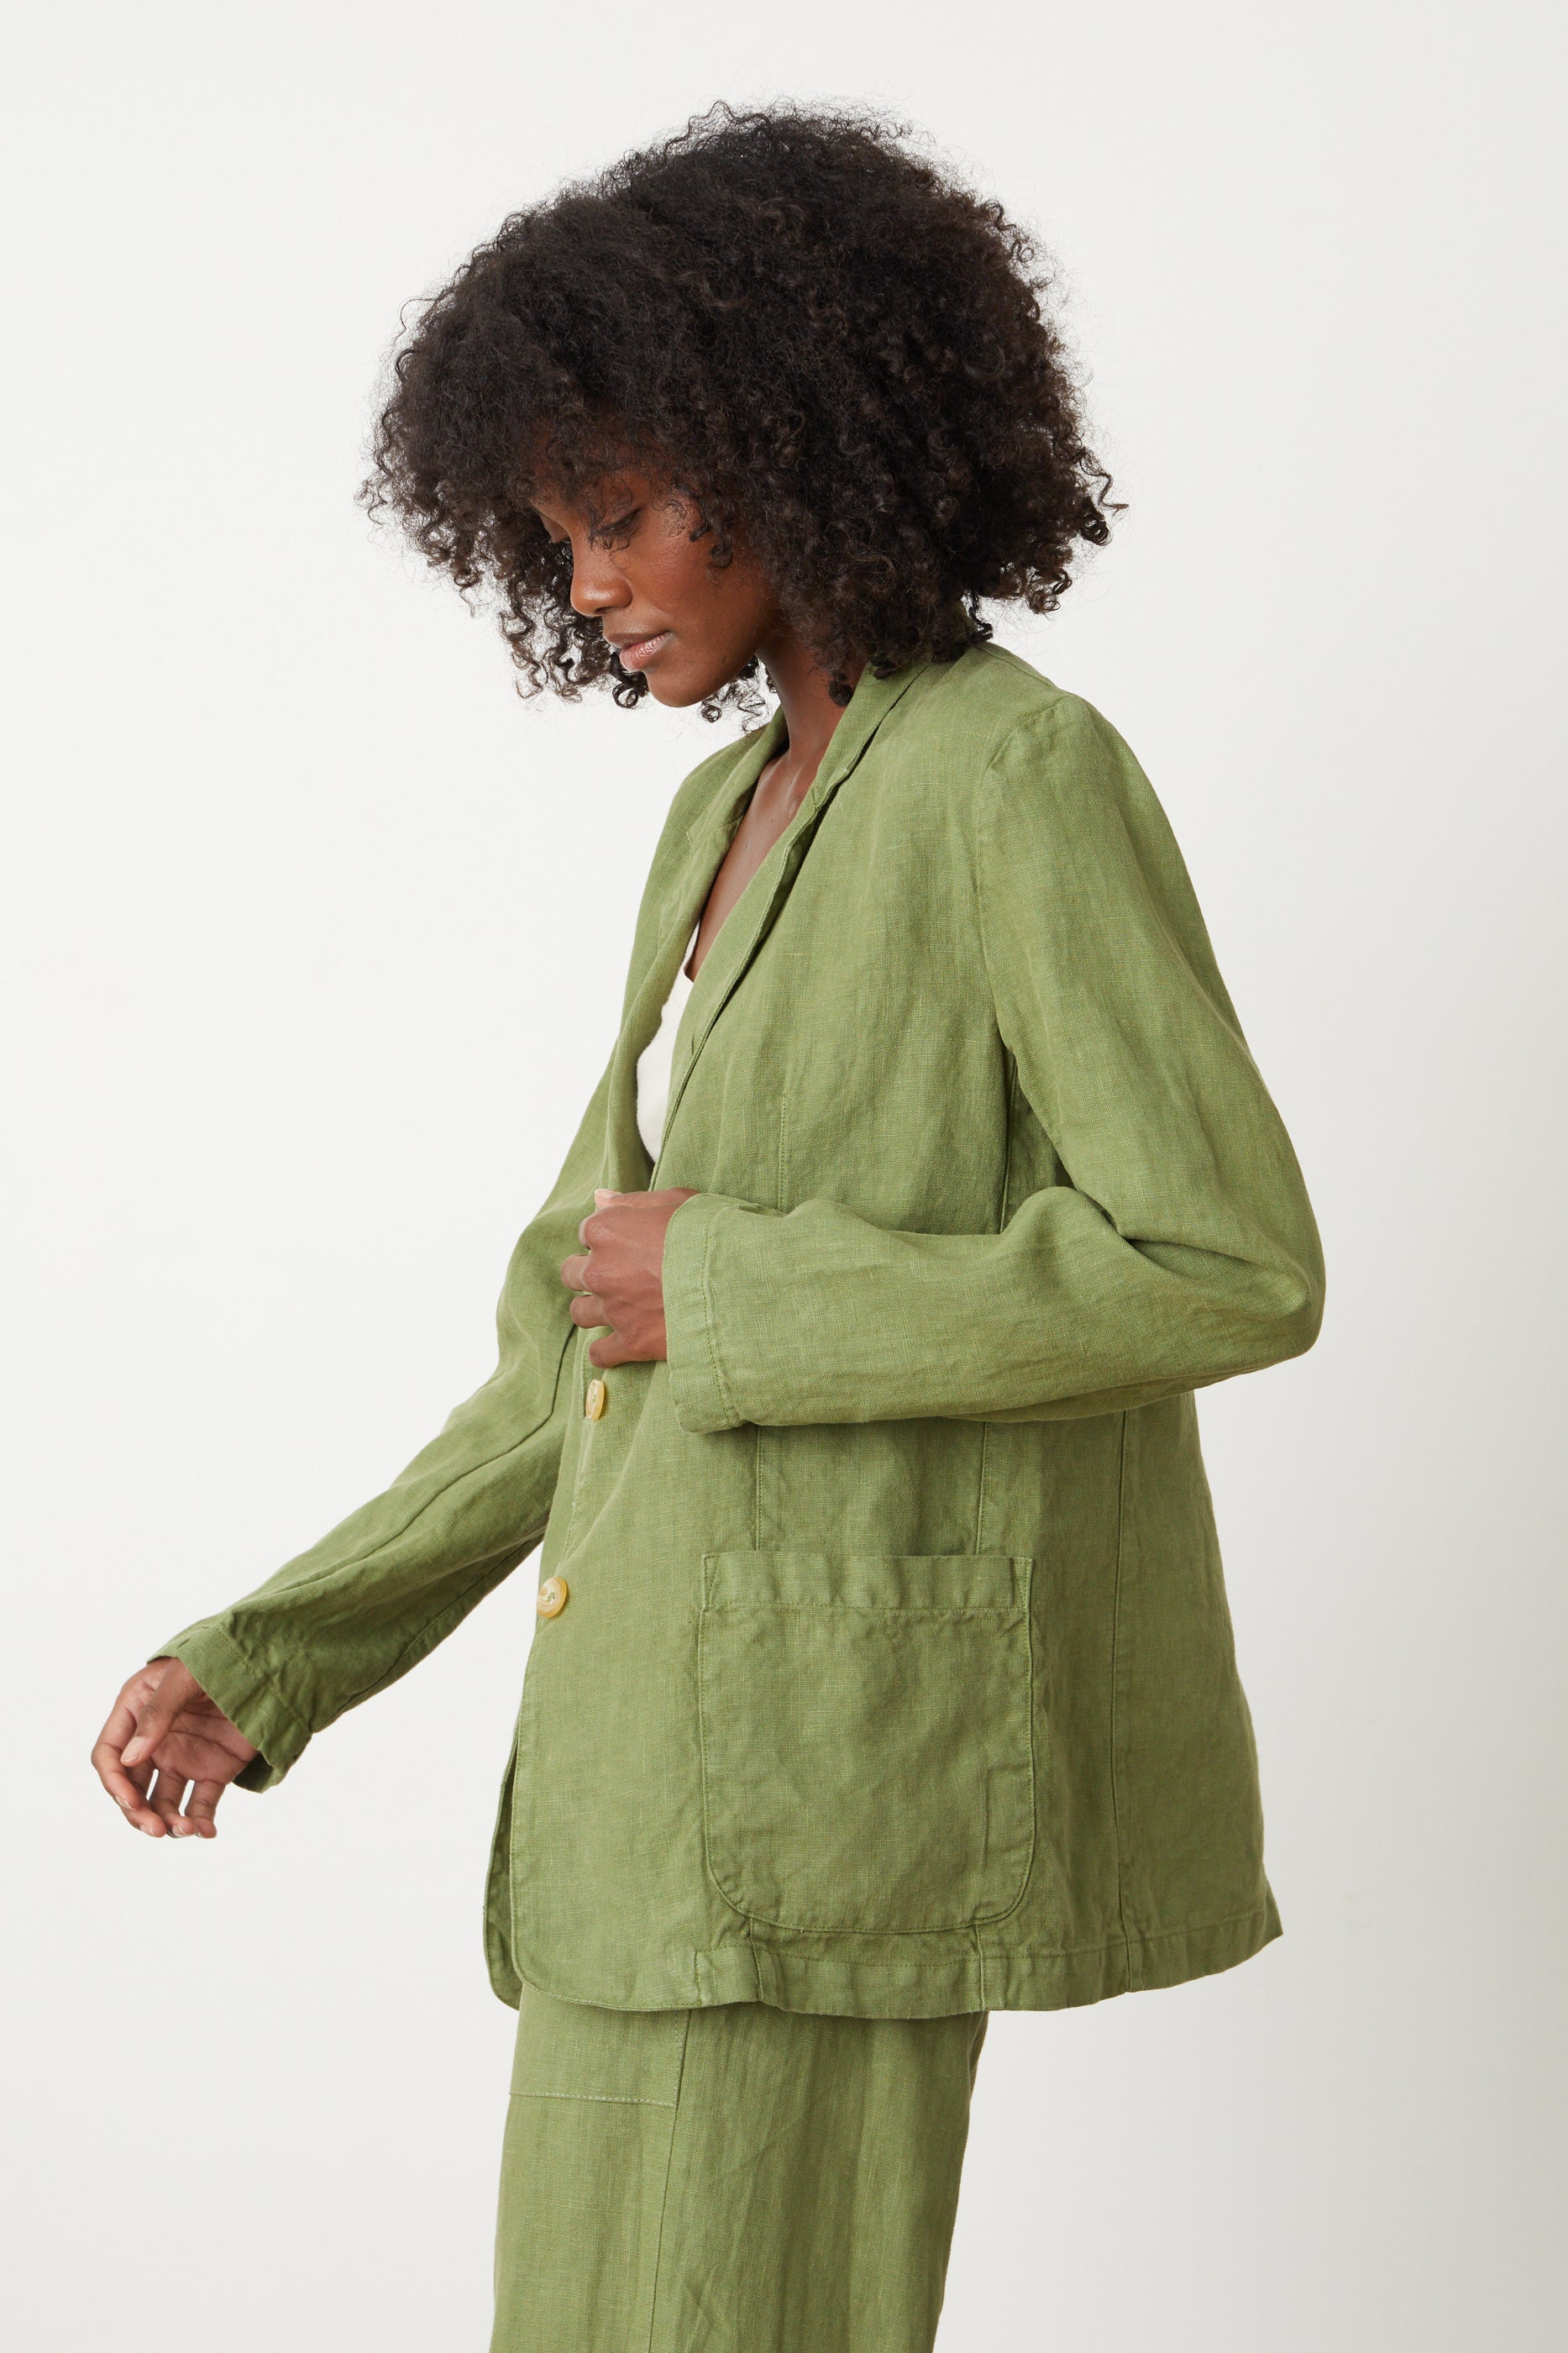   A woman wearing a tailored green CASSIE HEAVY LINEN BLAZER by Velvet by Graham & Spencer with cool-girl style. 